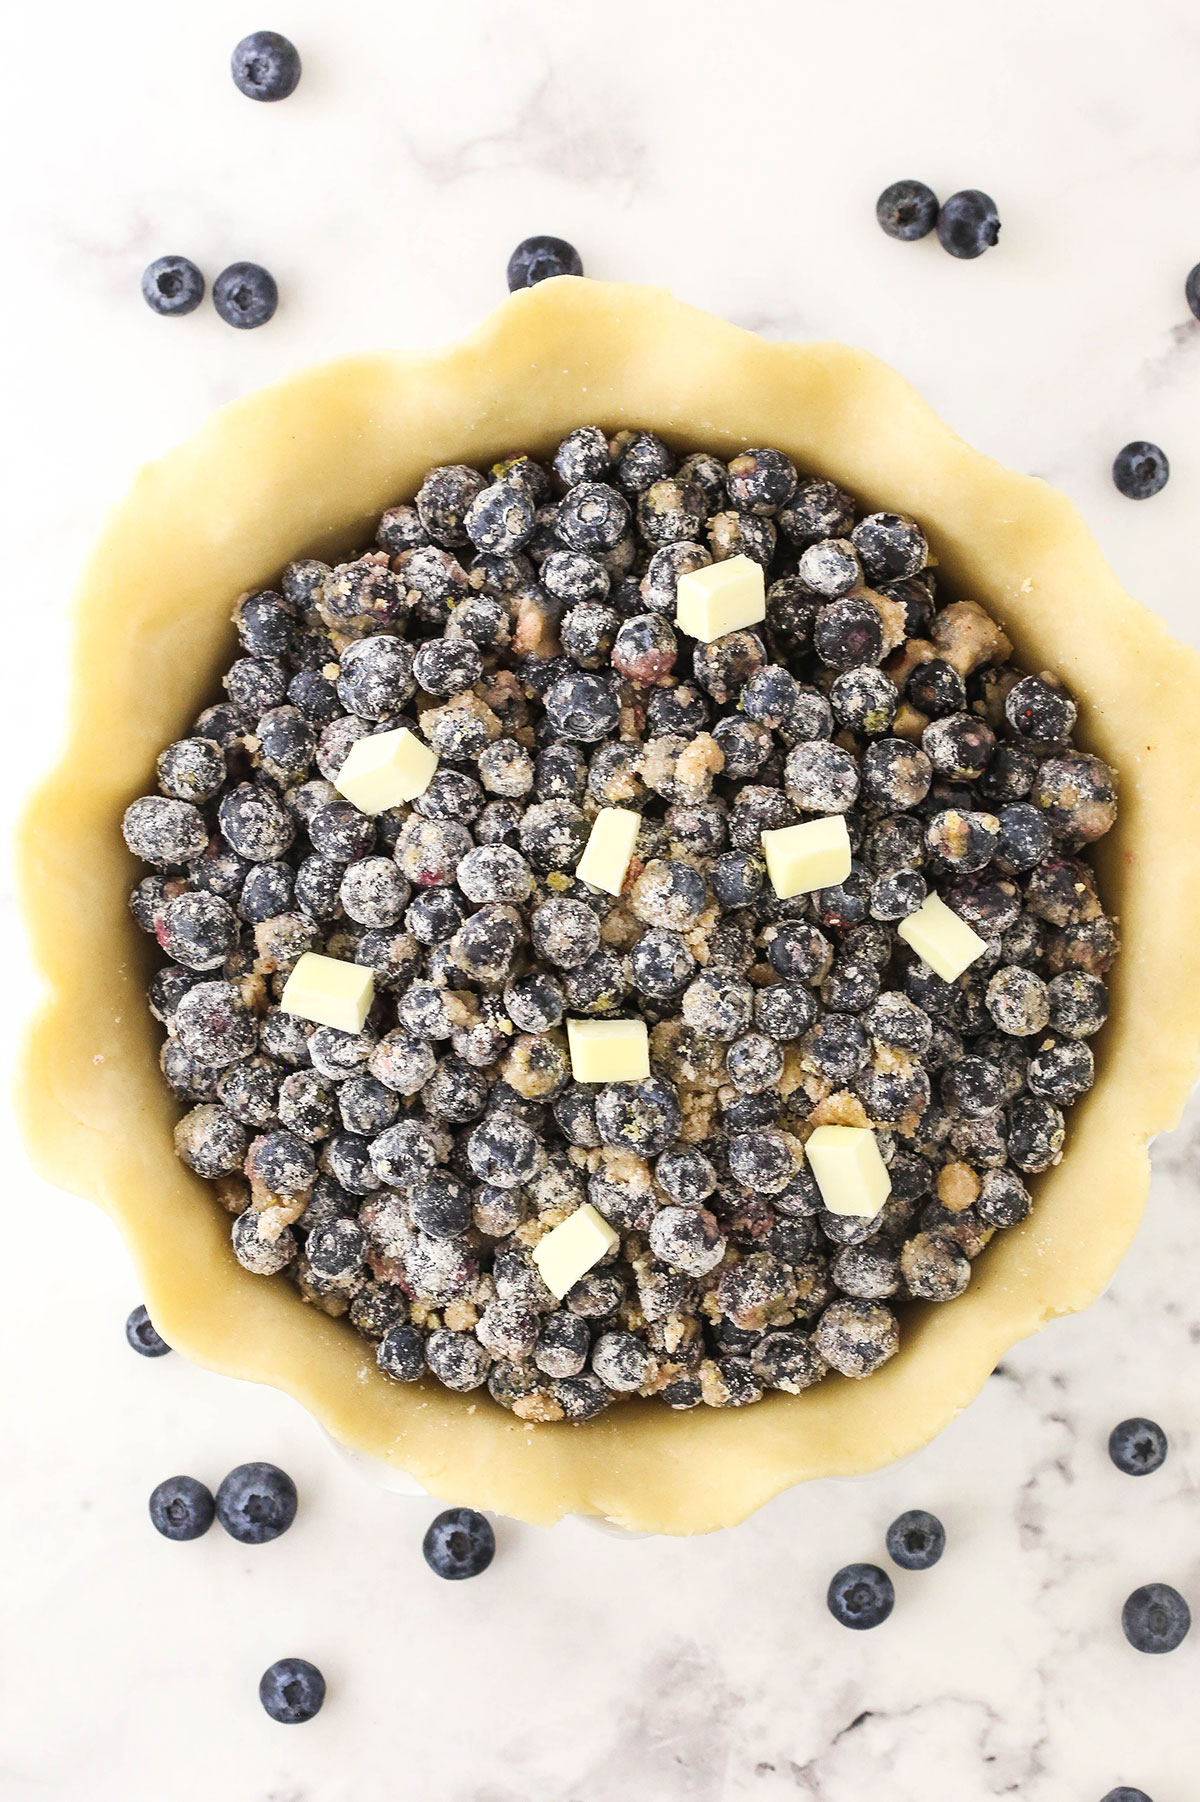 An unbaked pie crust in a pan with blueberry filling inside and small cubes of butter on top of the filling